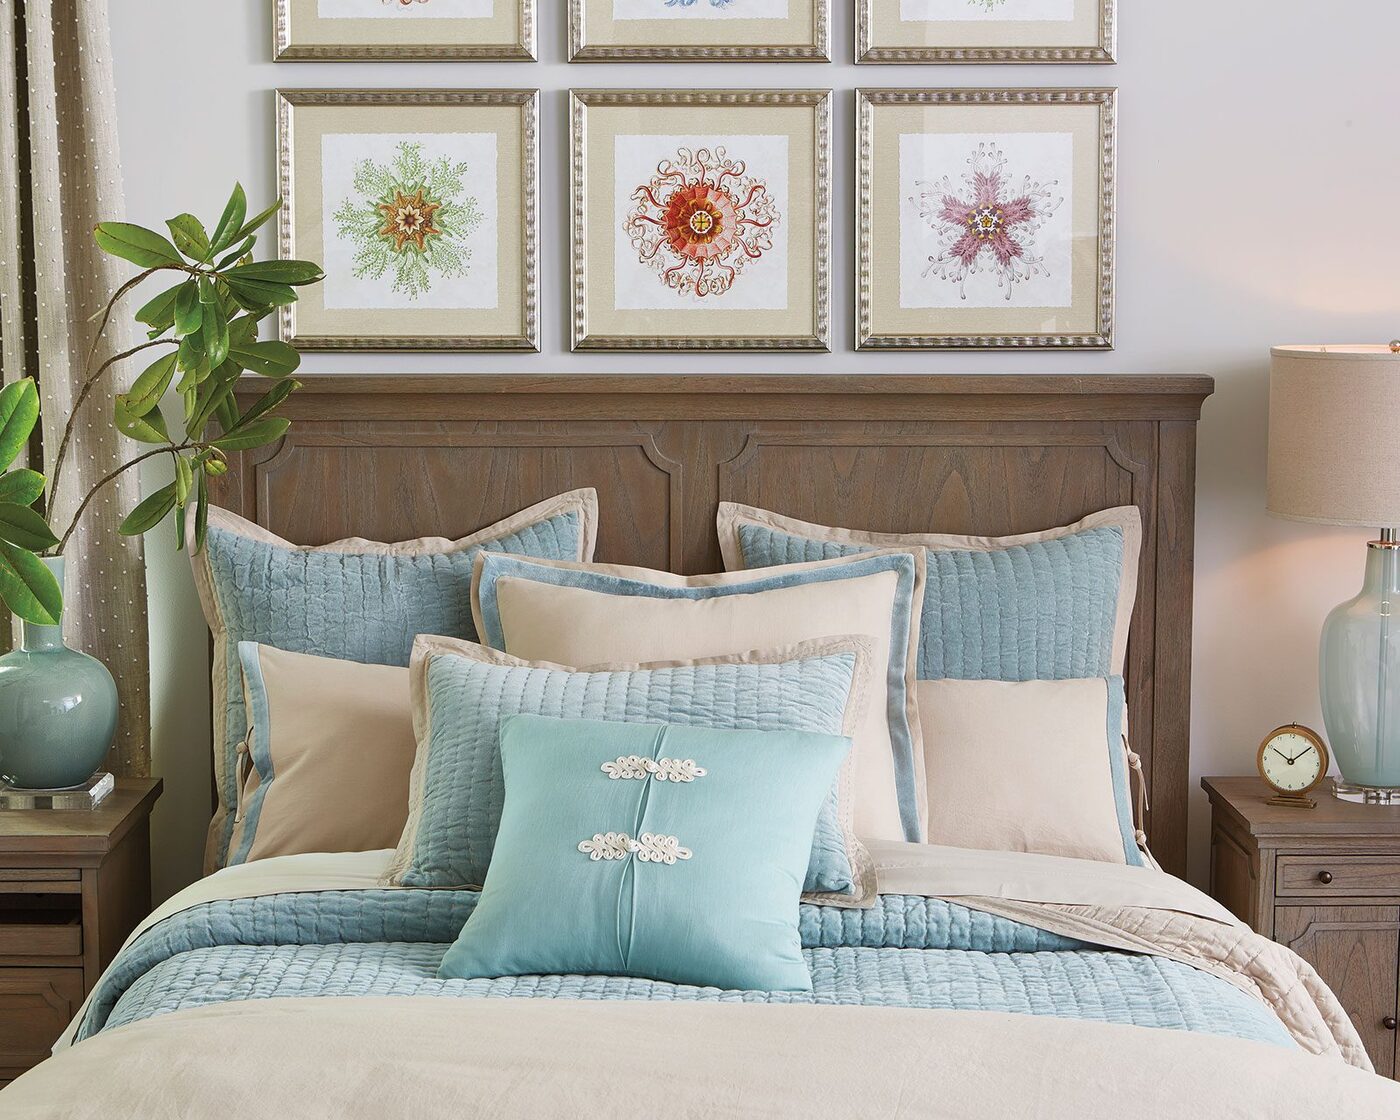 Bed Pillow Arrangements: Style Your Bed According To Size